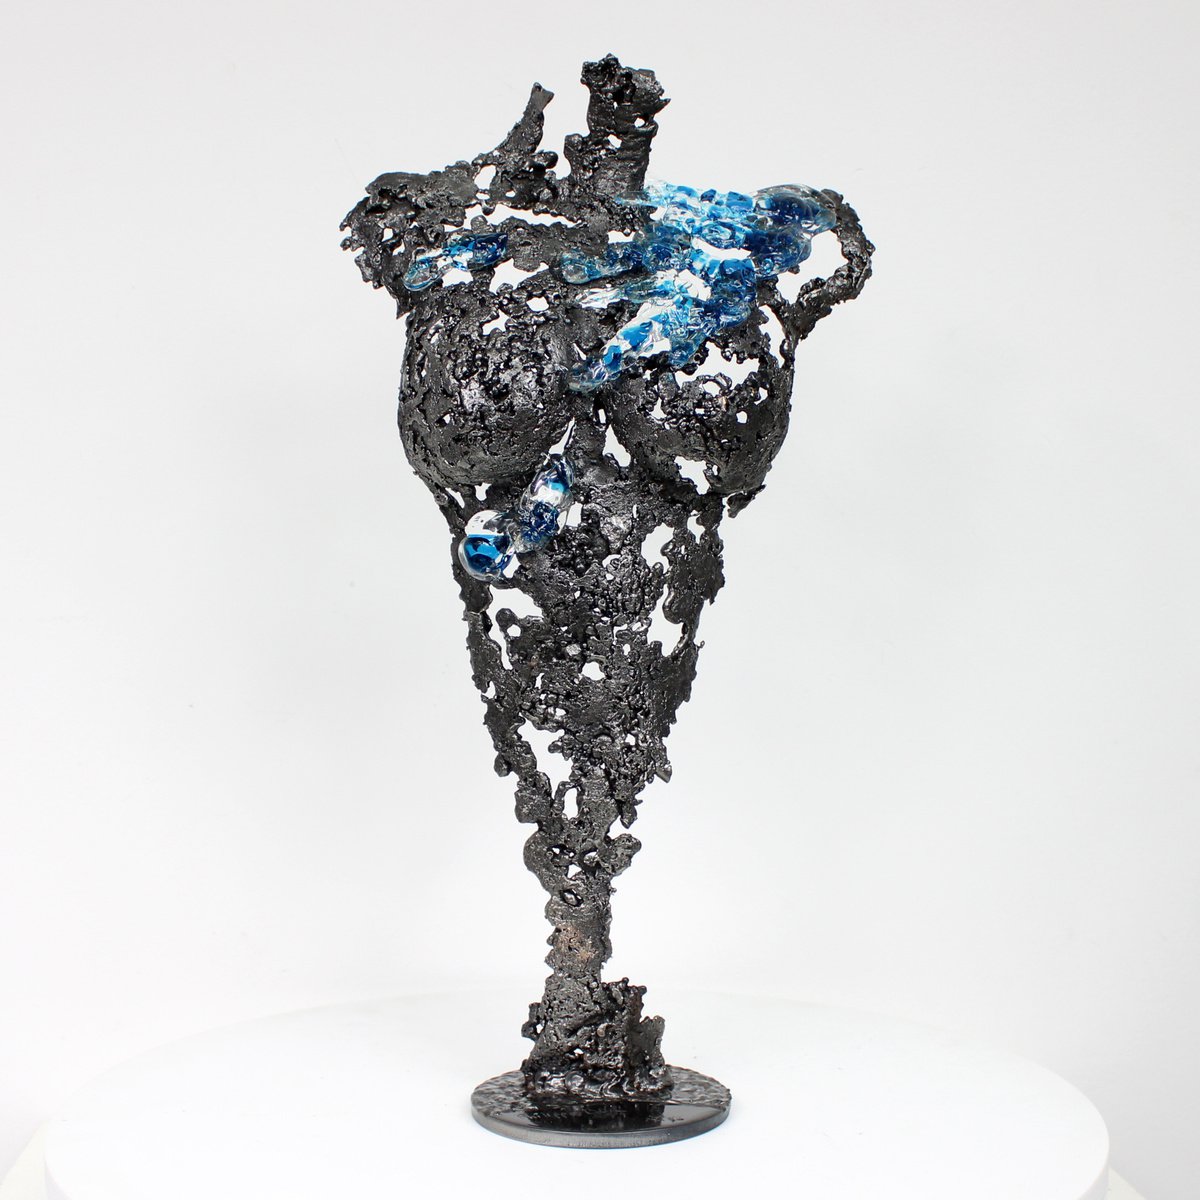 Pavarti blue wave - Woman body sculpture in metal and glass lace by Philippe Buil